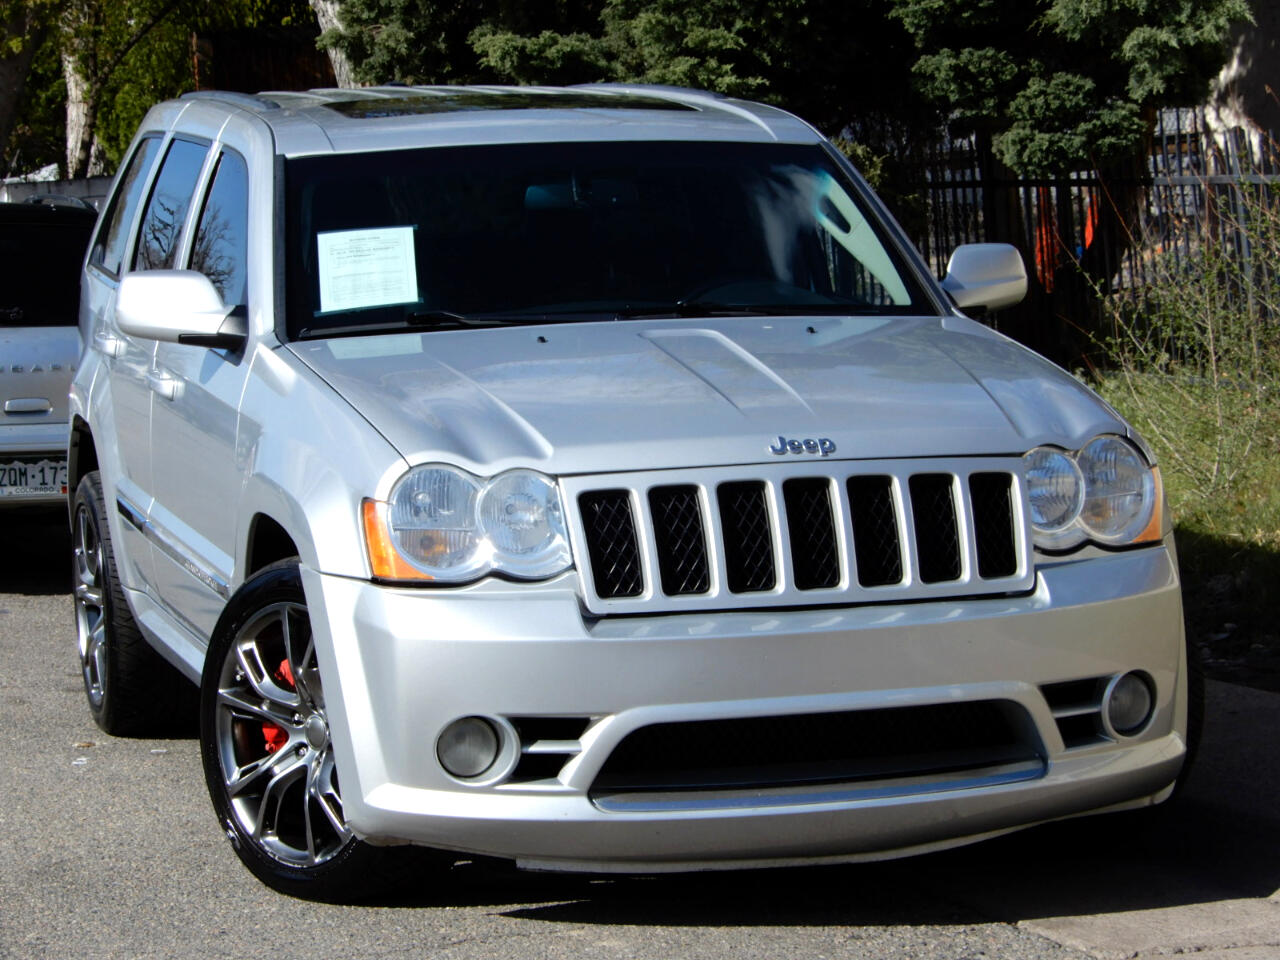 Used 2010 Jeep Grand Cherokee SRT8 for Sale in DENVER CO